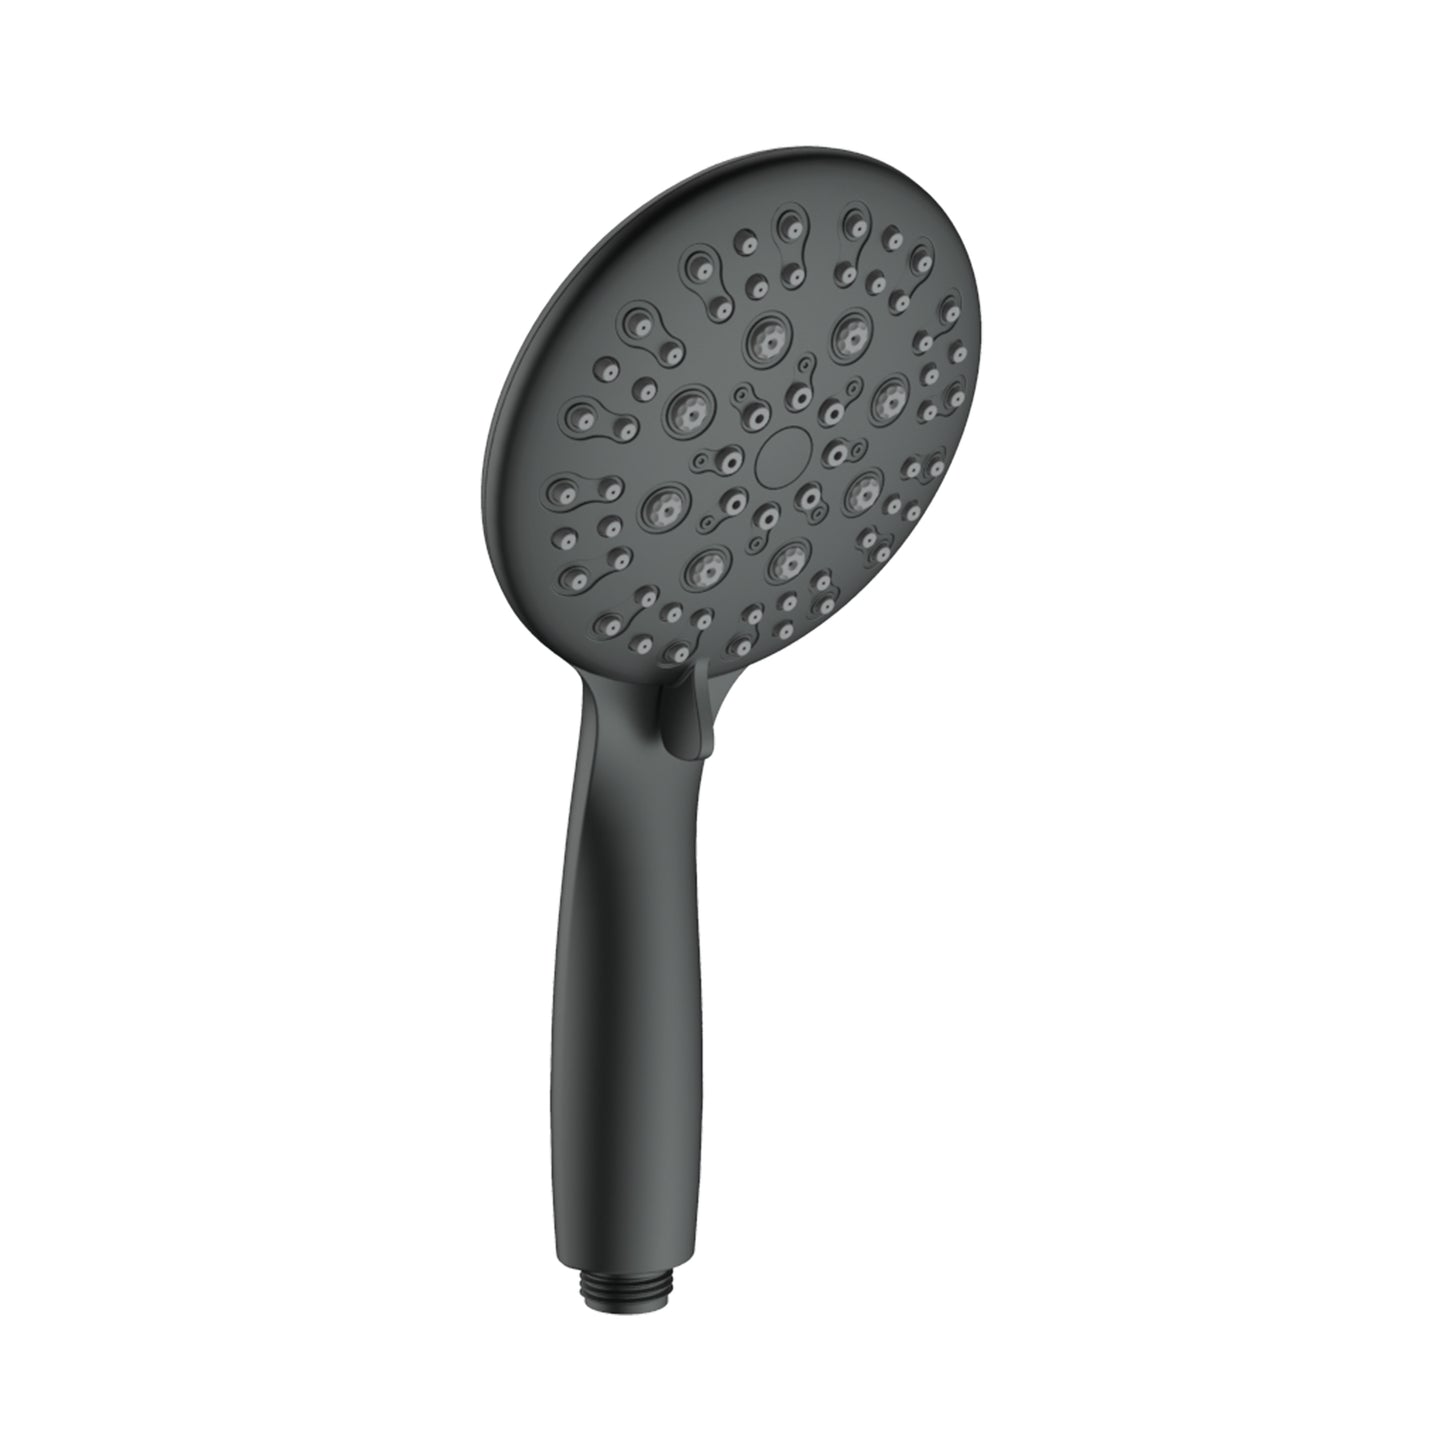 Large Amount of water Multi Function Dual Shower Head - Shower System with 4." Rain Showerhead, 6-Function Hand Shower, Matte Black